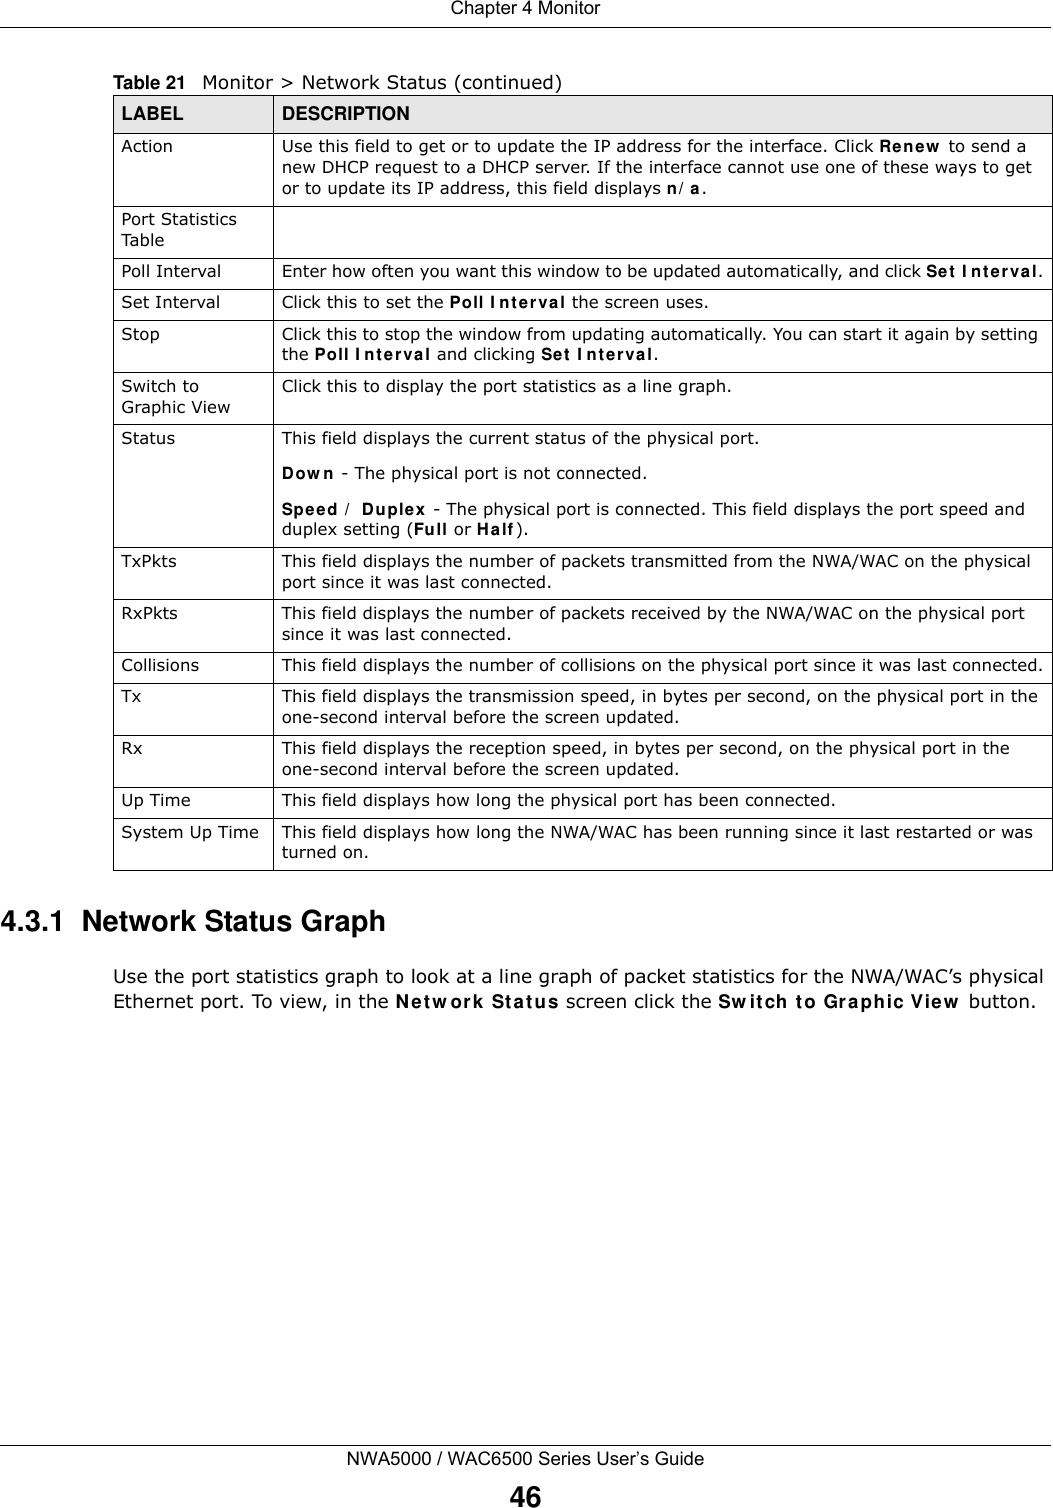 Chapter 4 MonitorNWA5000 / WAC6500 Series User’s Guide464.3.1  Network Status Graph Use the port statistics graph to look at a line graph of packet statistics for the NWA/WAC’s physical Ethernet port. To view, in the N et w ork Sta t us screen click the Sw it ch  t o Gra phic Vie w  button.Action Use this field to get or to update the IP address for the interface. Click Renew  to send a new DHCP request to a DHCP server. If the interface cannot use one of these ways to get or to update its IP address, this field displays n/ a.Port Statistics TablePoll Interval Enter how often you want this window to be updated automatically, and click Set  I nt e r v a l.Set Interval Click this to set the Poll I nt e r va l the screen uses.Stop Click this to stop the window from updating automatically. You can start it again by setting the Poll I nt erval and clicking Set  I nterval.Switch to Graphic ViewClick this to display the port statistics as a line graph.Status This field displays the current status of the physical port. Dow n - The physical port is not connected.Speed /  Duplex - The physical port is connected. This field displays the port speed and duplex setting (Full or H alf ).TxPkts This field displays the number of packets transmitted from the NWA/WAC on the physical port since it was last connected.RxPkts This field displays the number of packets received by the NWA/WAC on the physical port since it was last connected.Collisions This field displays the number of collisions on the physical port since it was last connected.Tx This field displays the transmission speed, in bytes per second, on the physical port in the one-second interval before the screen updated.Rx This field displays the reception speed, in bytes per second, on the physical port in the one-second interval before the screen updated.Up Time This field displays how long the physical port has been connected.System Up Time This field displays how long the NWA/WAC has been running since it last restarted or was turned on.Table 21   Monitor &gt; Network Status (continued)LABEL DESCRIPTION